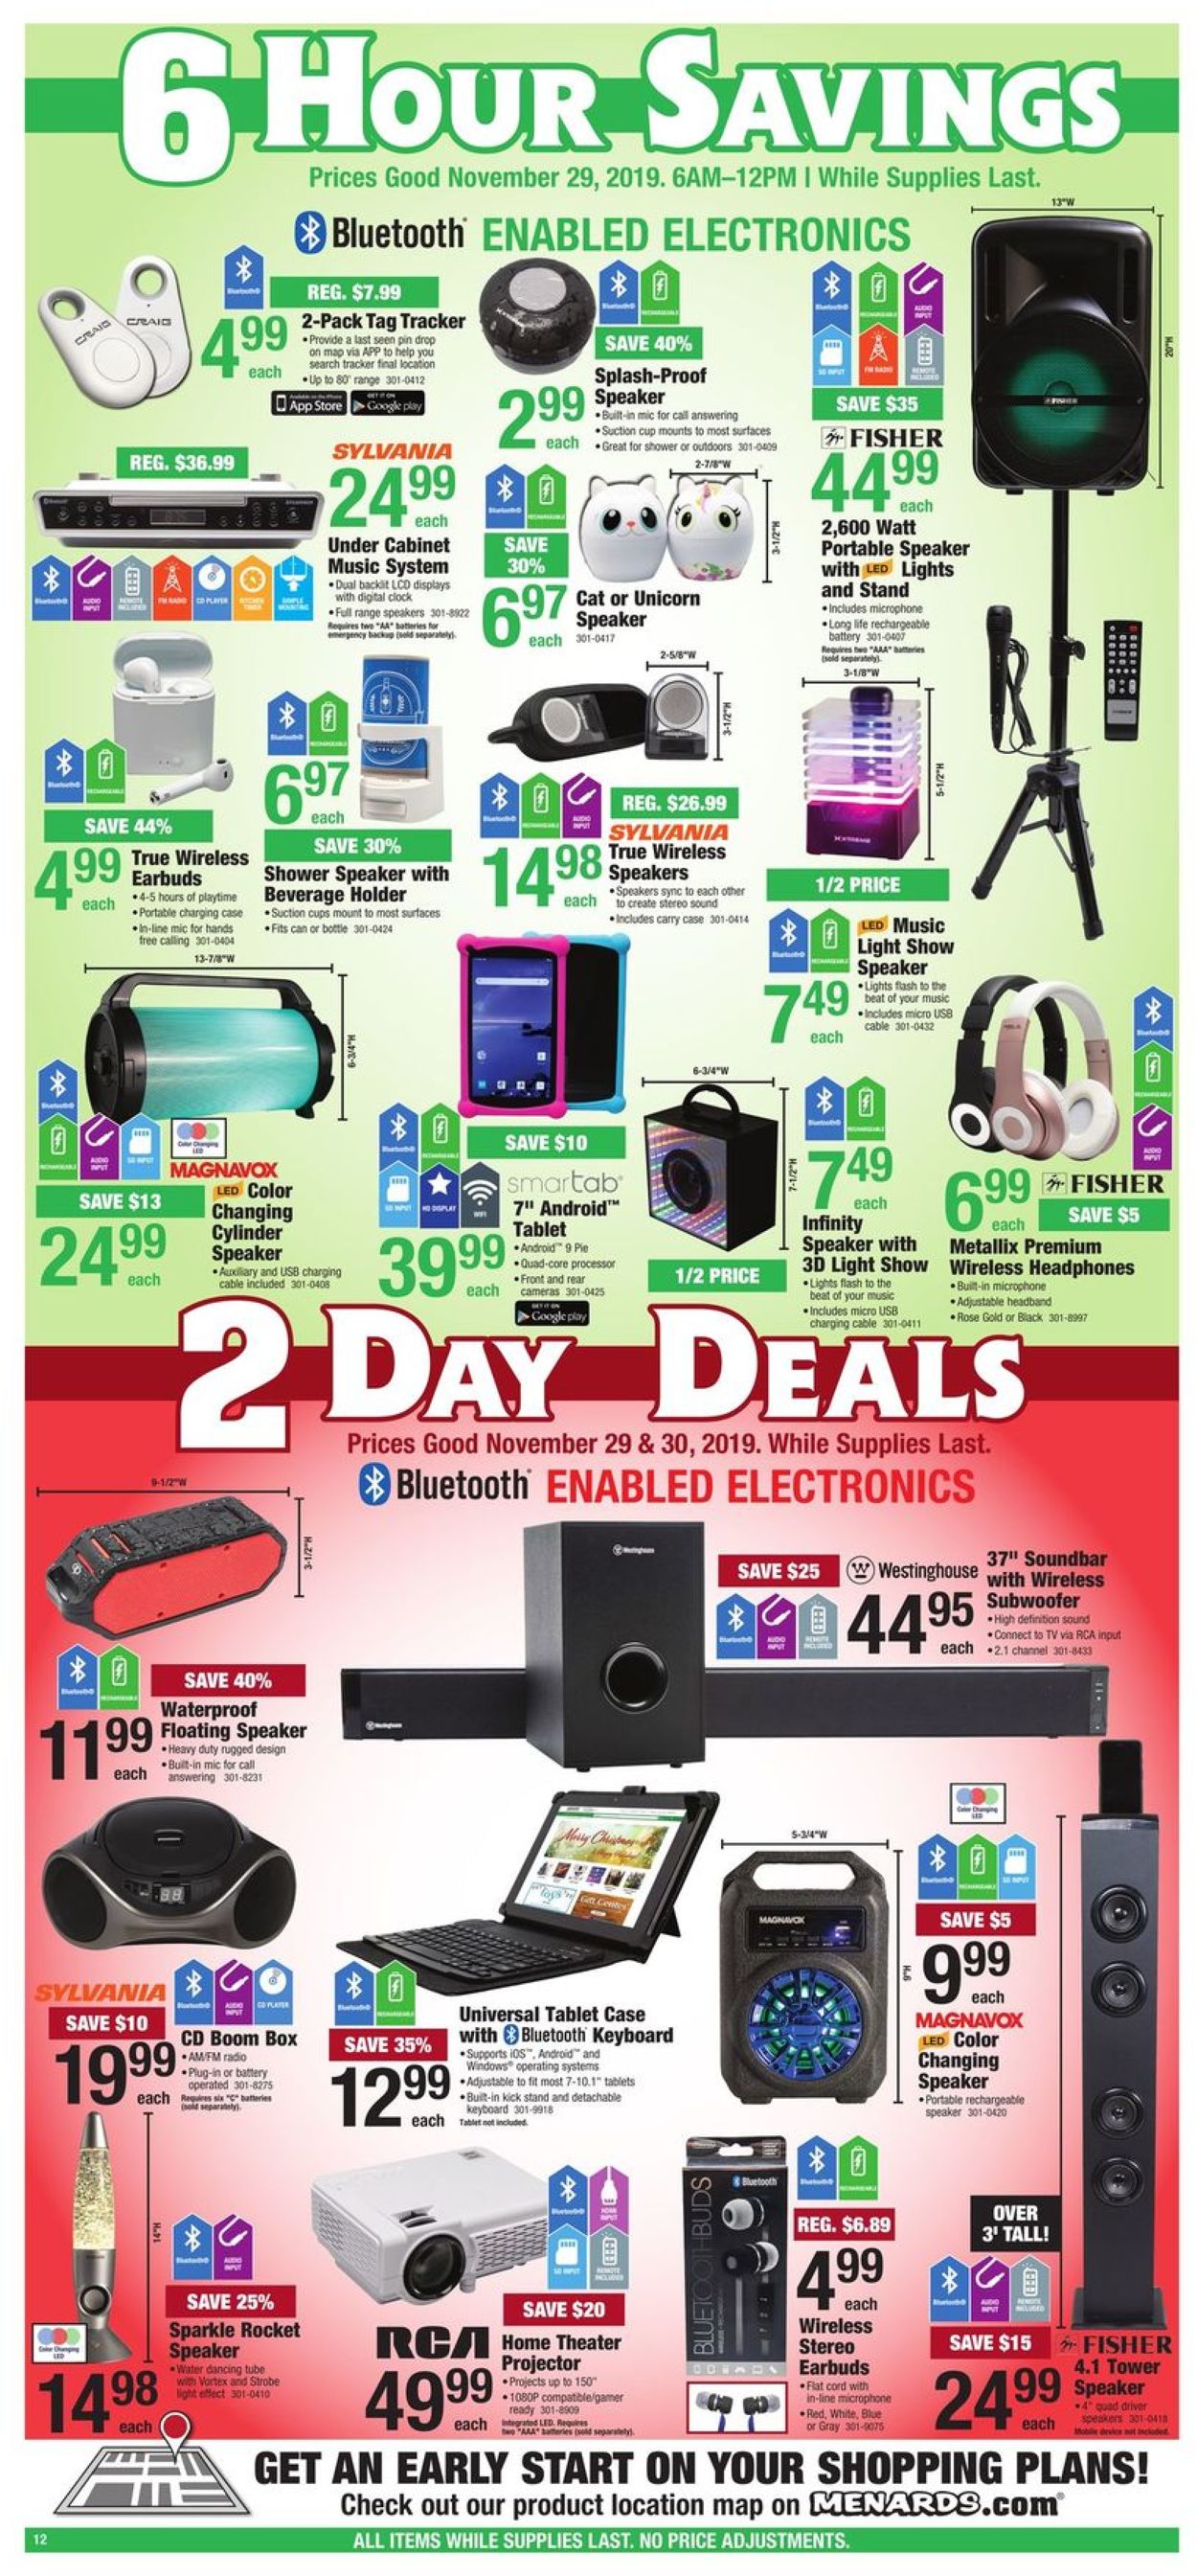 Menards - Black Friday Sale 2019 Current weekly ad 11/29 - 11/30/2019 [13] - www.bagsaleusa.com/product-category/onthego-bag/